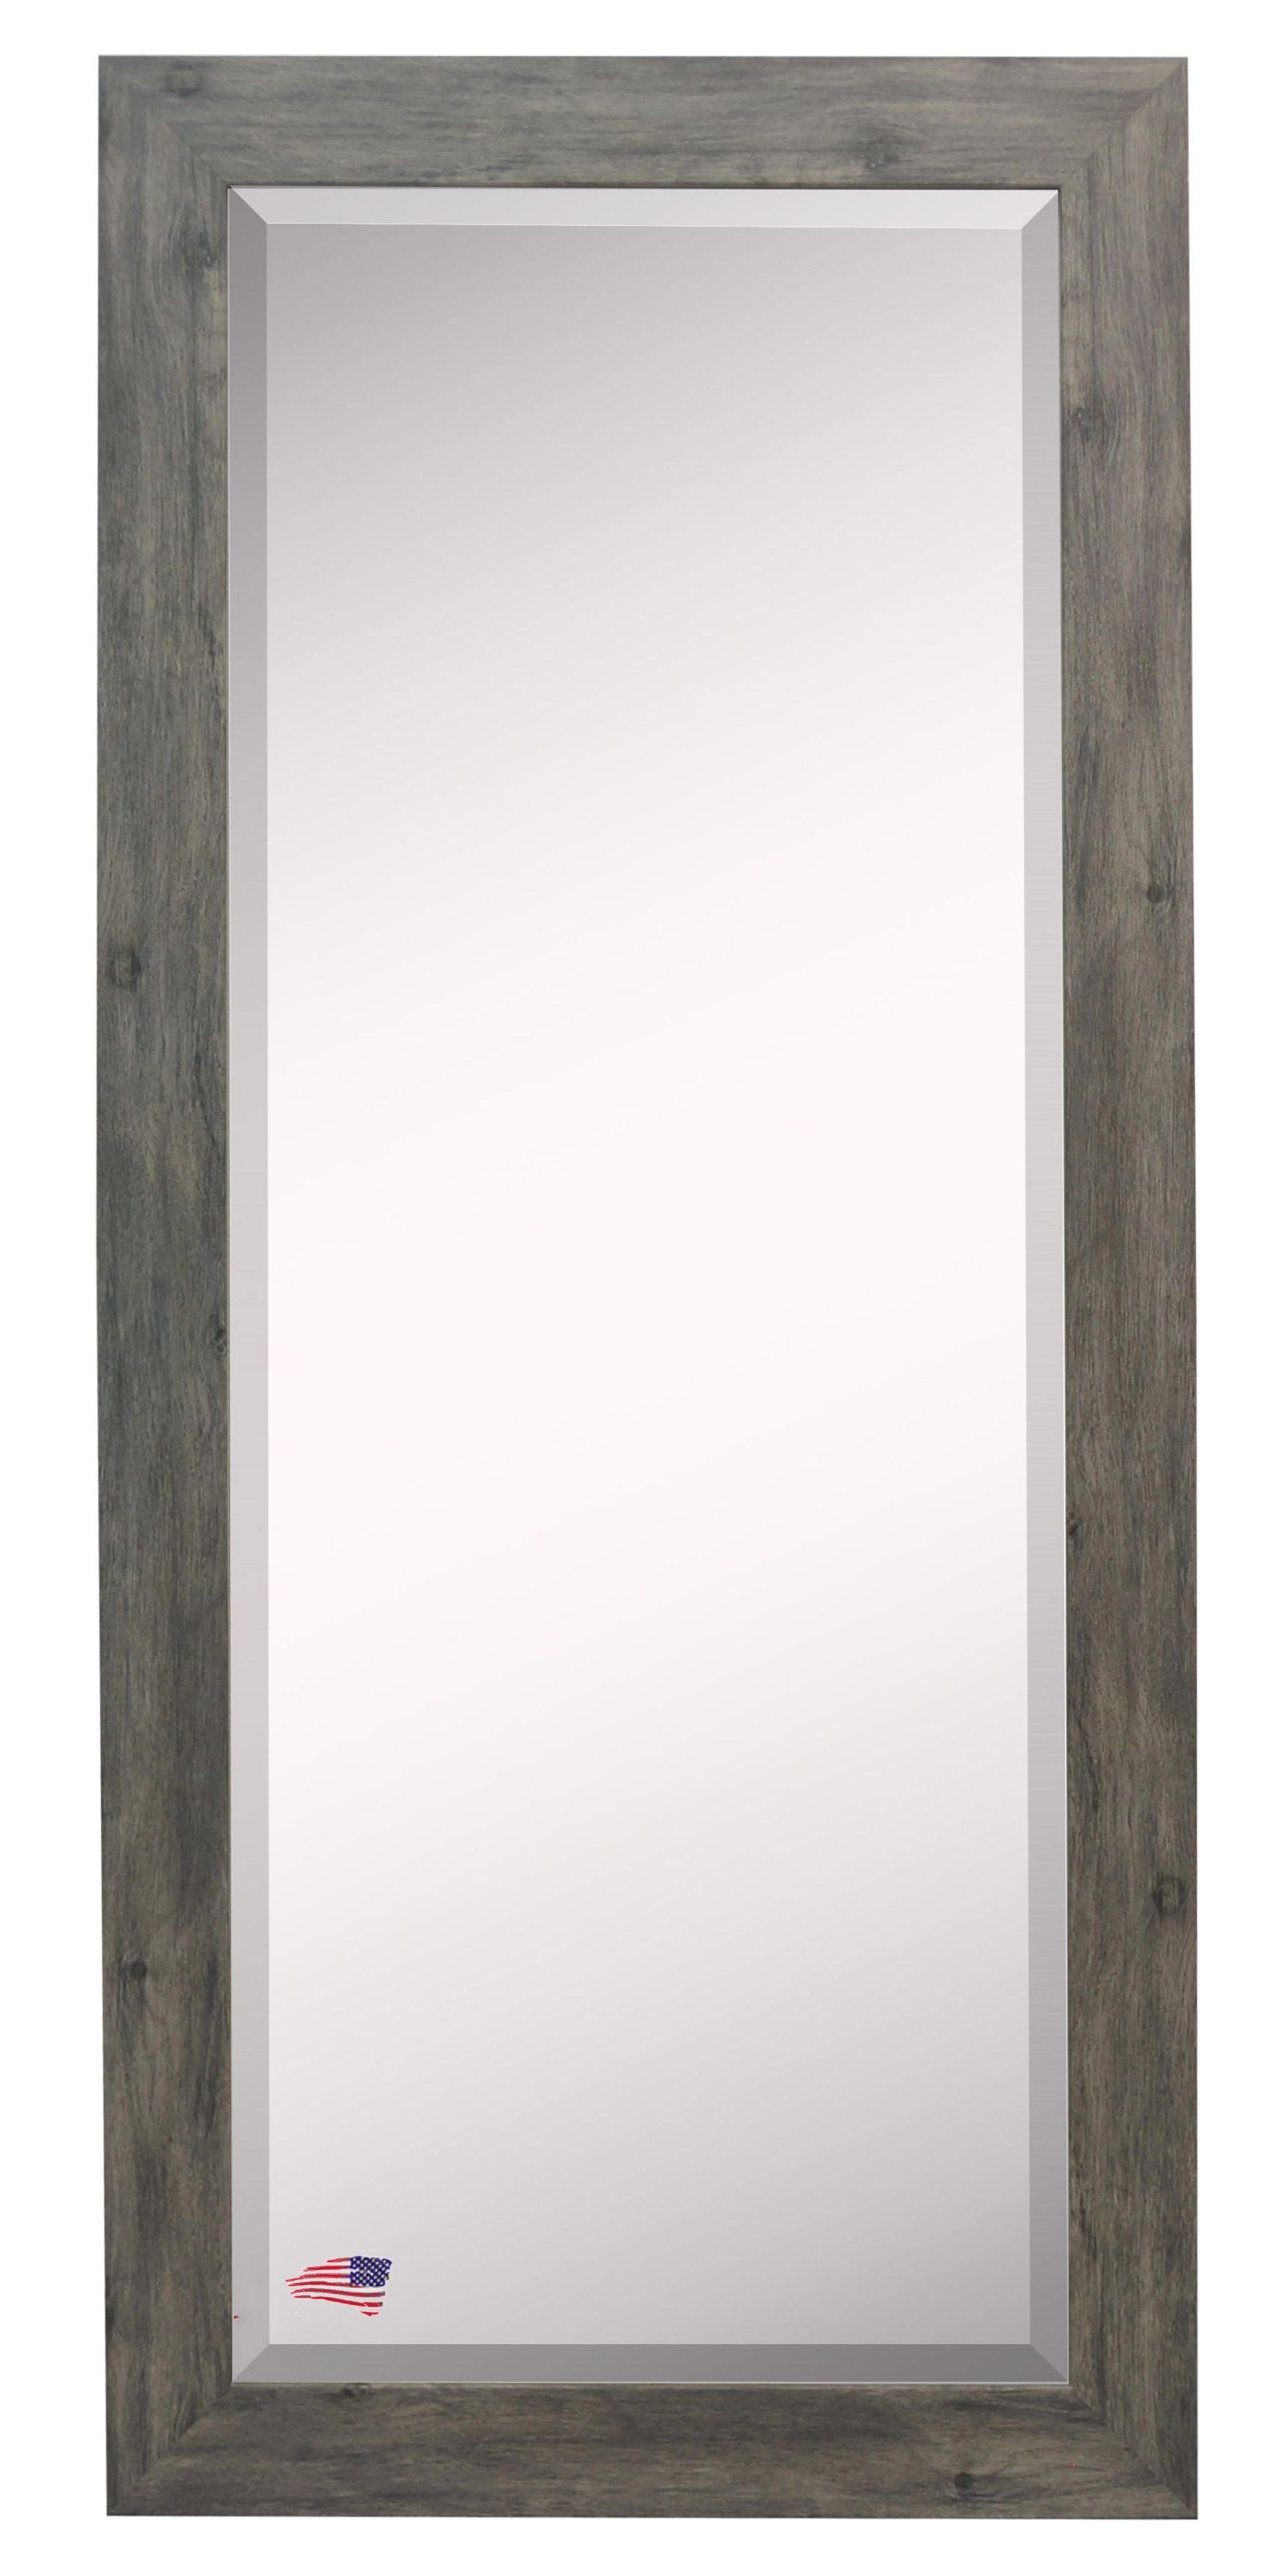 Most Recently Released Dalessio Wide Tall Full Length Mirrors For Extra Tall Floor Accent Mirror (View 12 of 20)